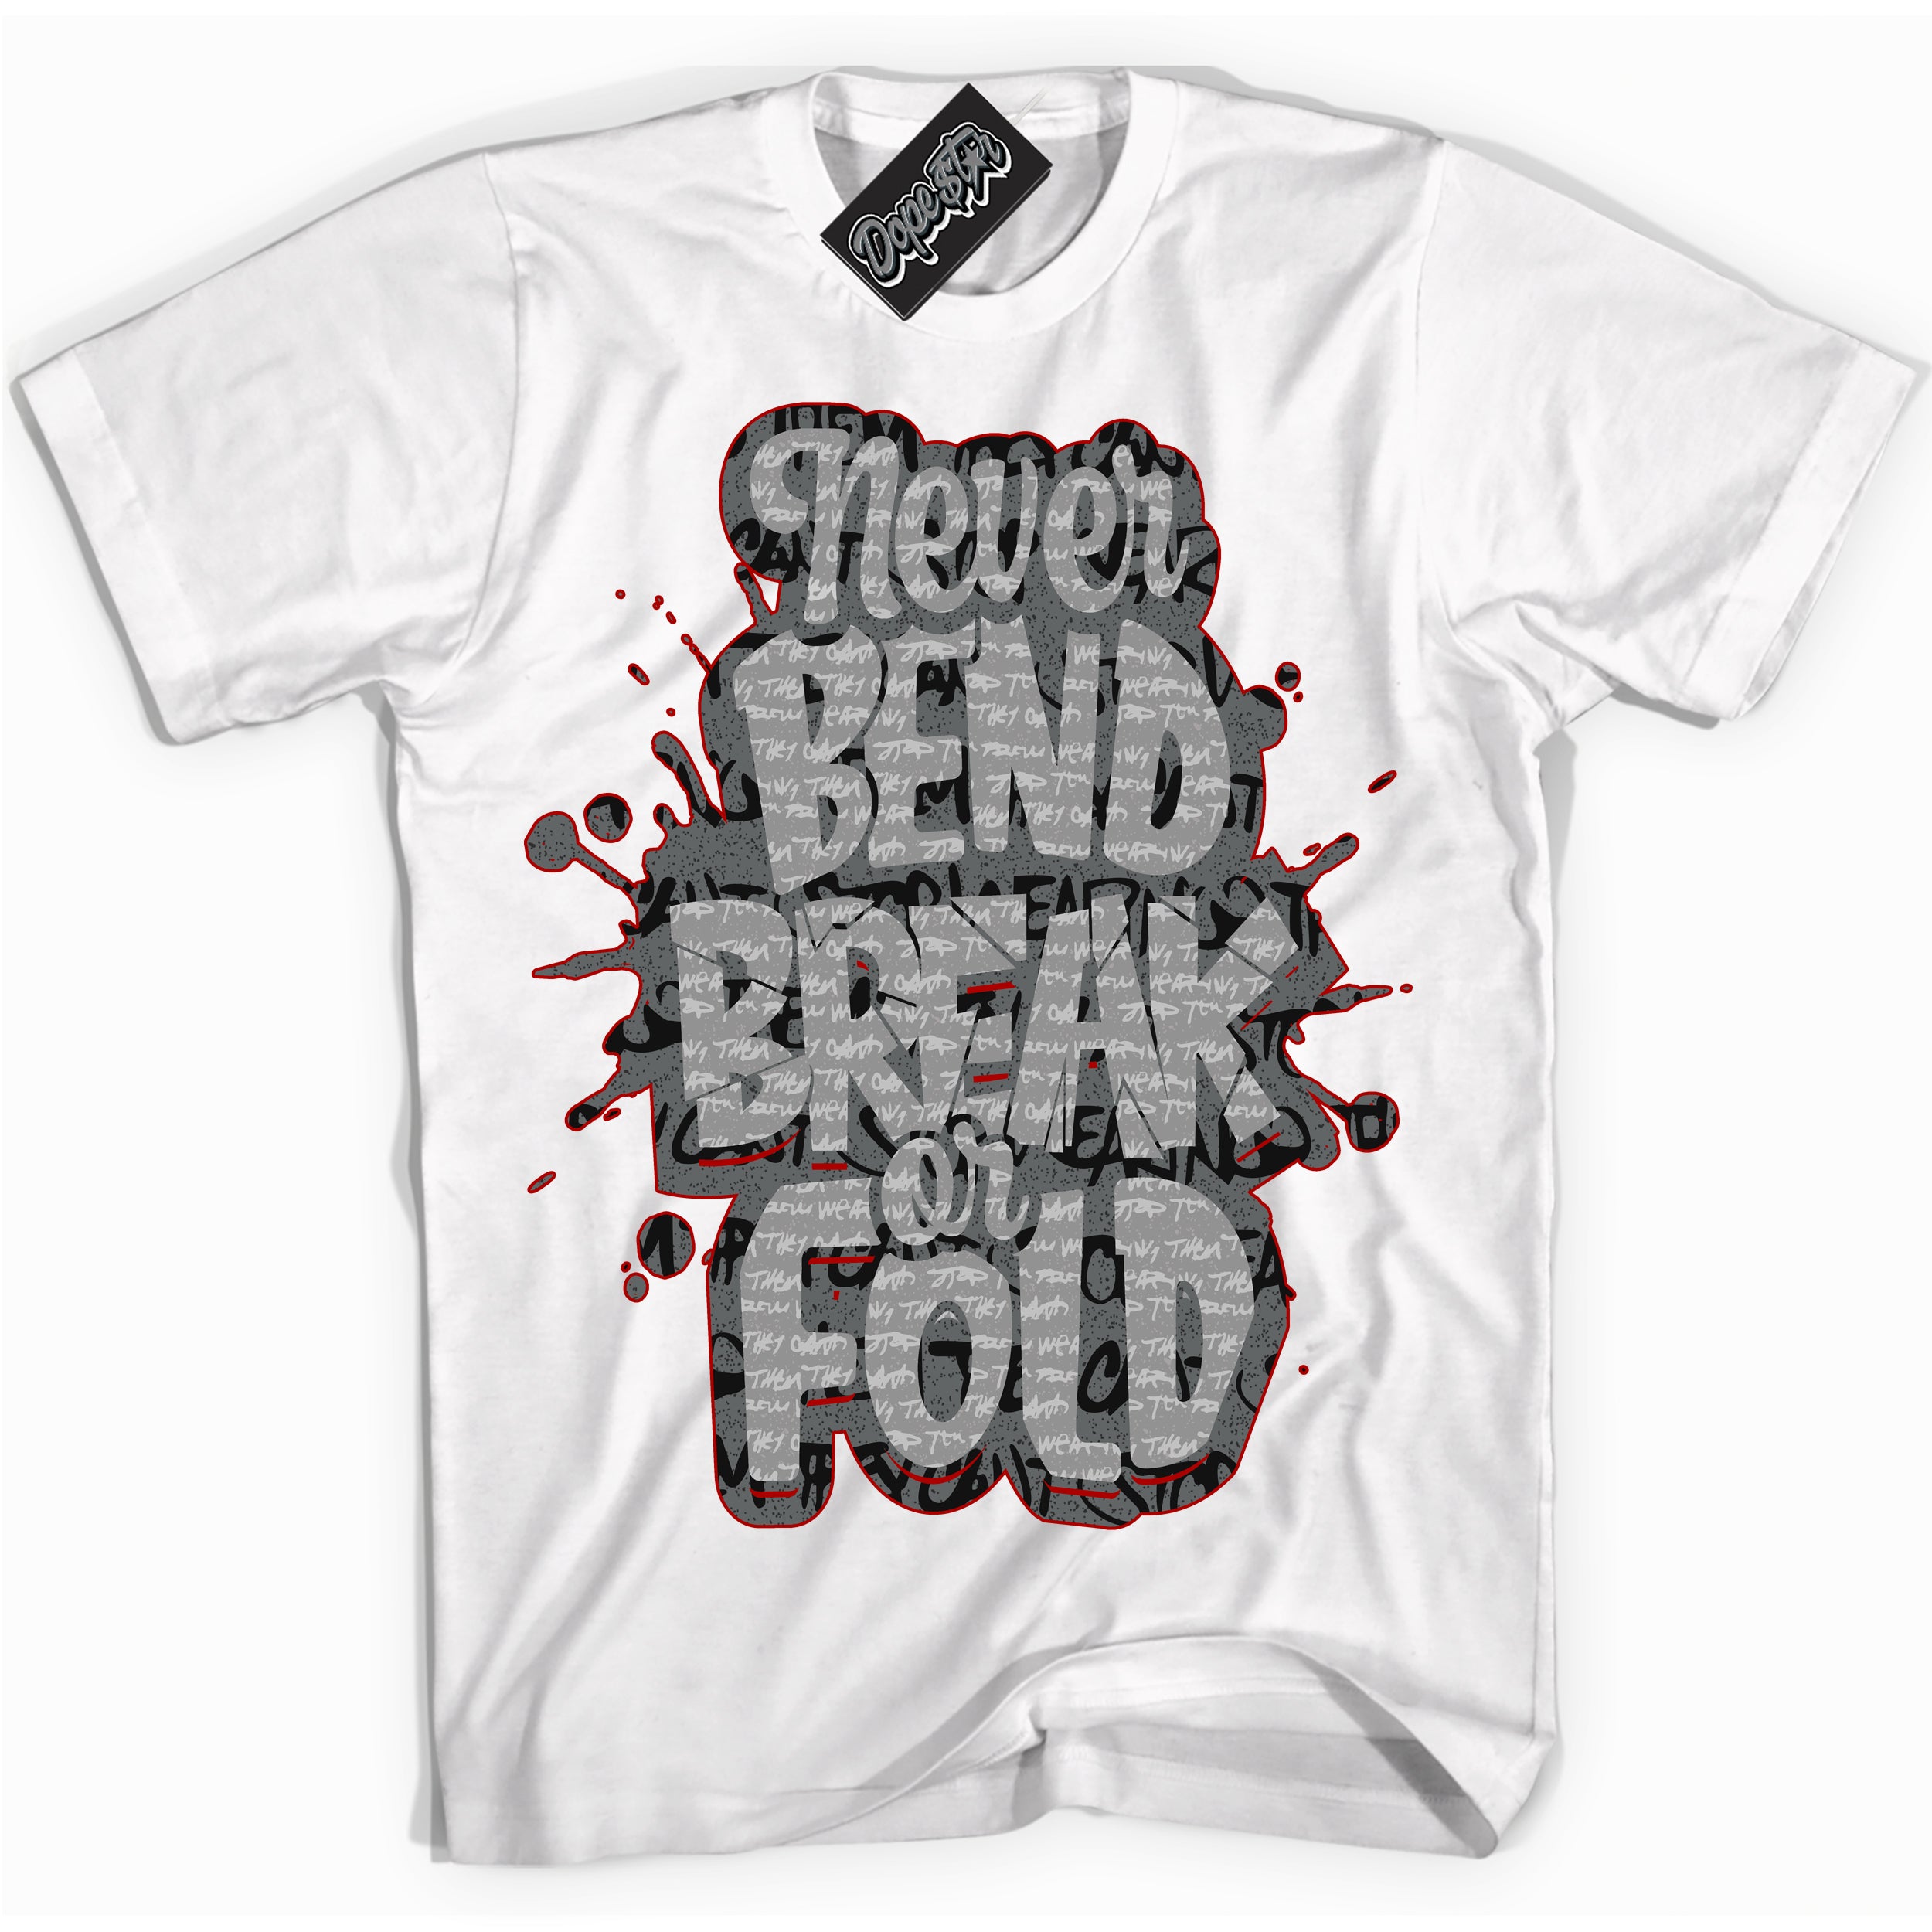 Cool White Shirt with “ Never Bend Break Or Fold ” design that perfectly matches Rebellionaire 1s Sneakers.